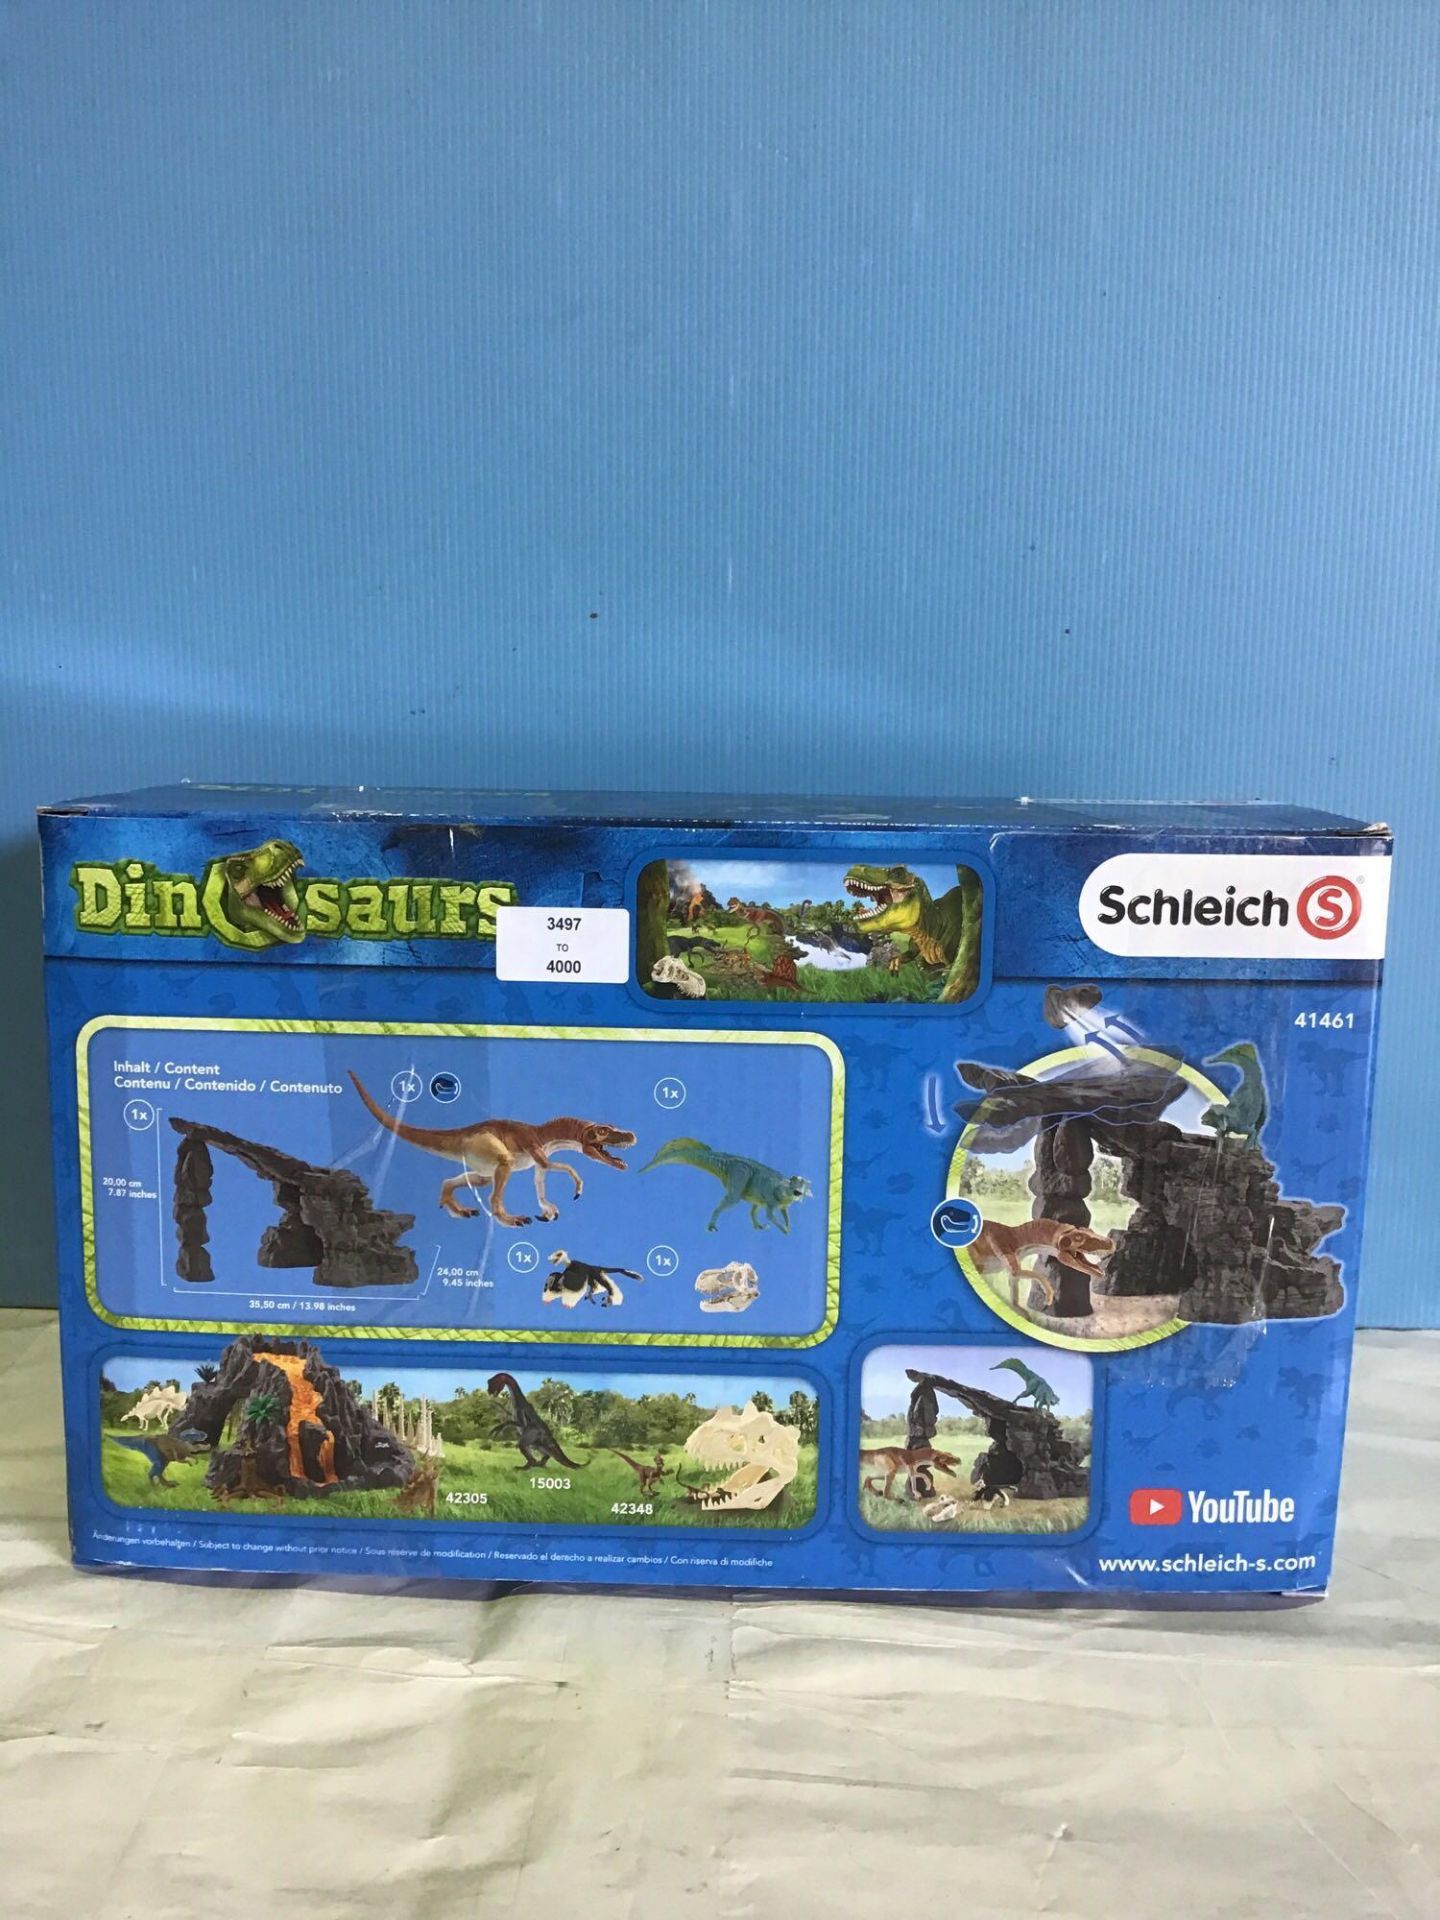 Schleich Dinosaurs 41461 Dino set with Cave £44.99 RRP - Image 2 of 5